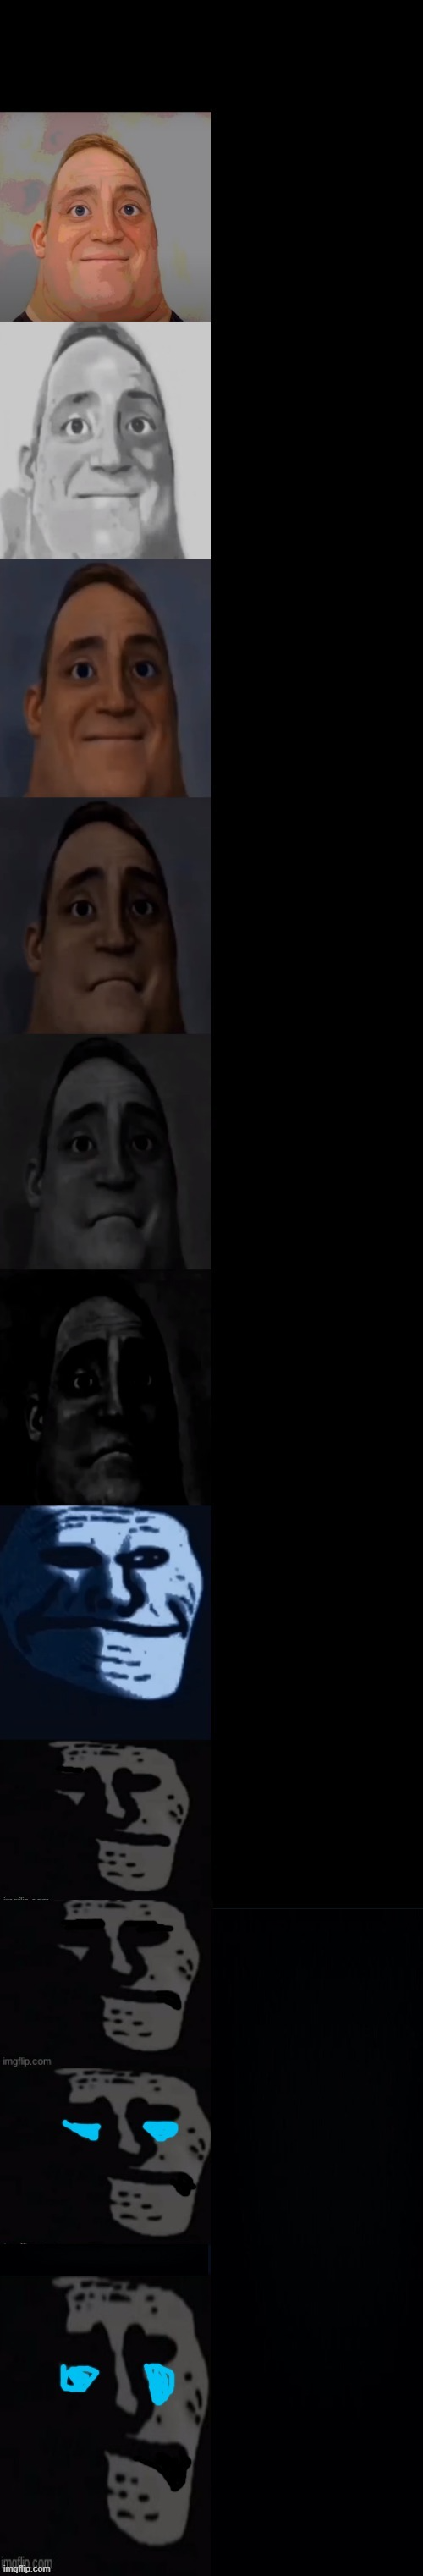 mr incredible becoming sad extended Blank Meme Template